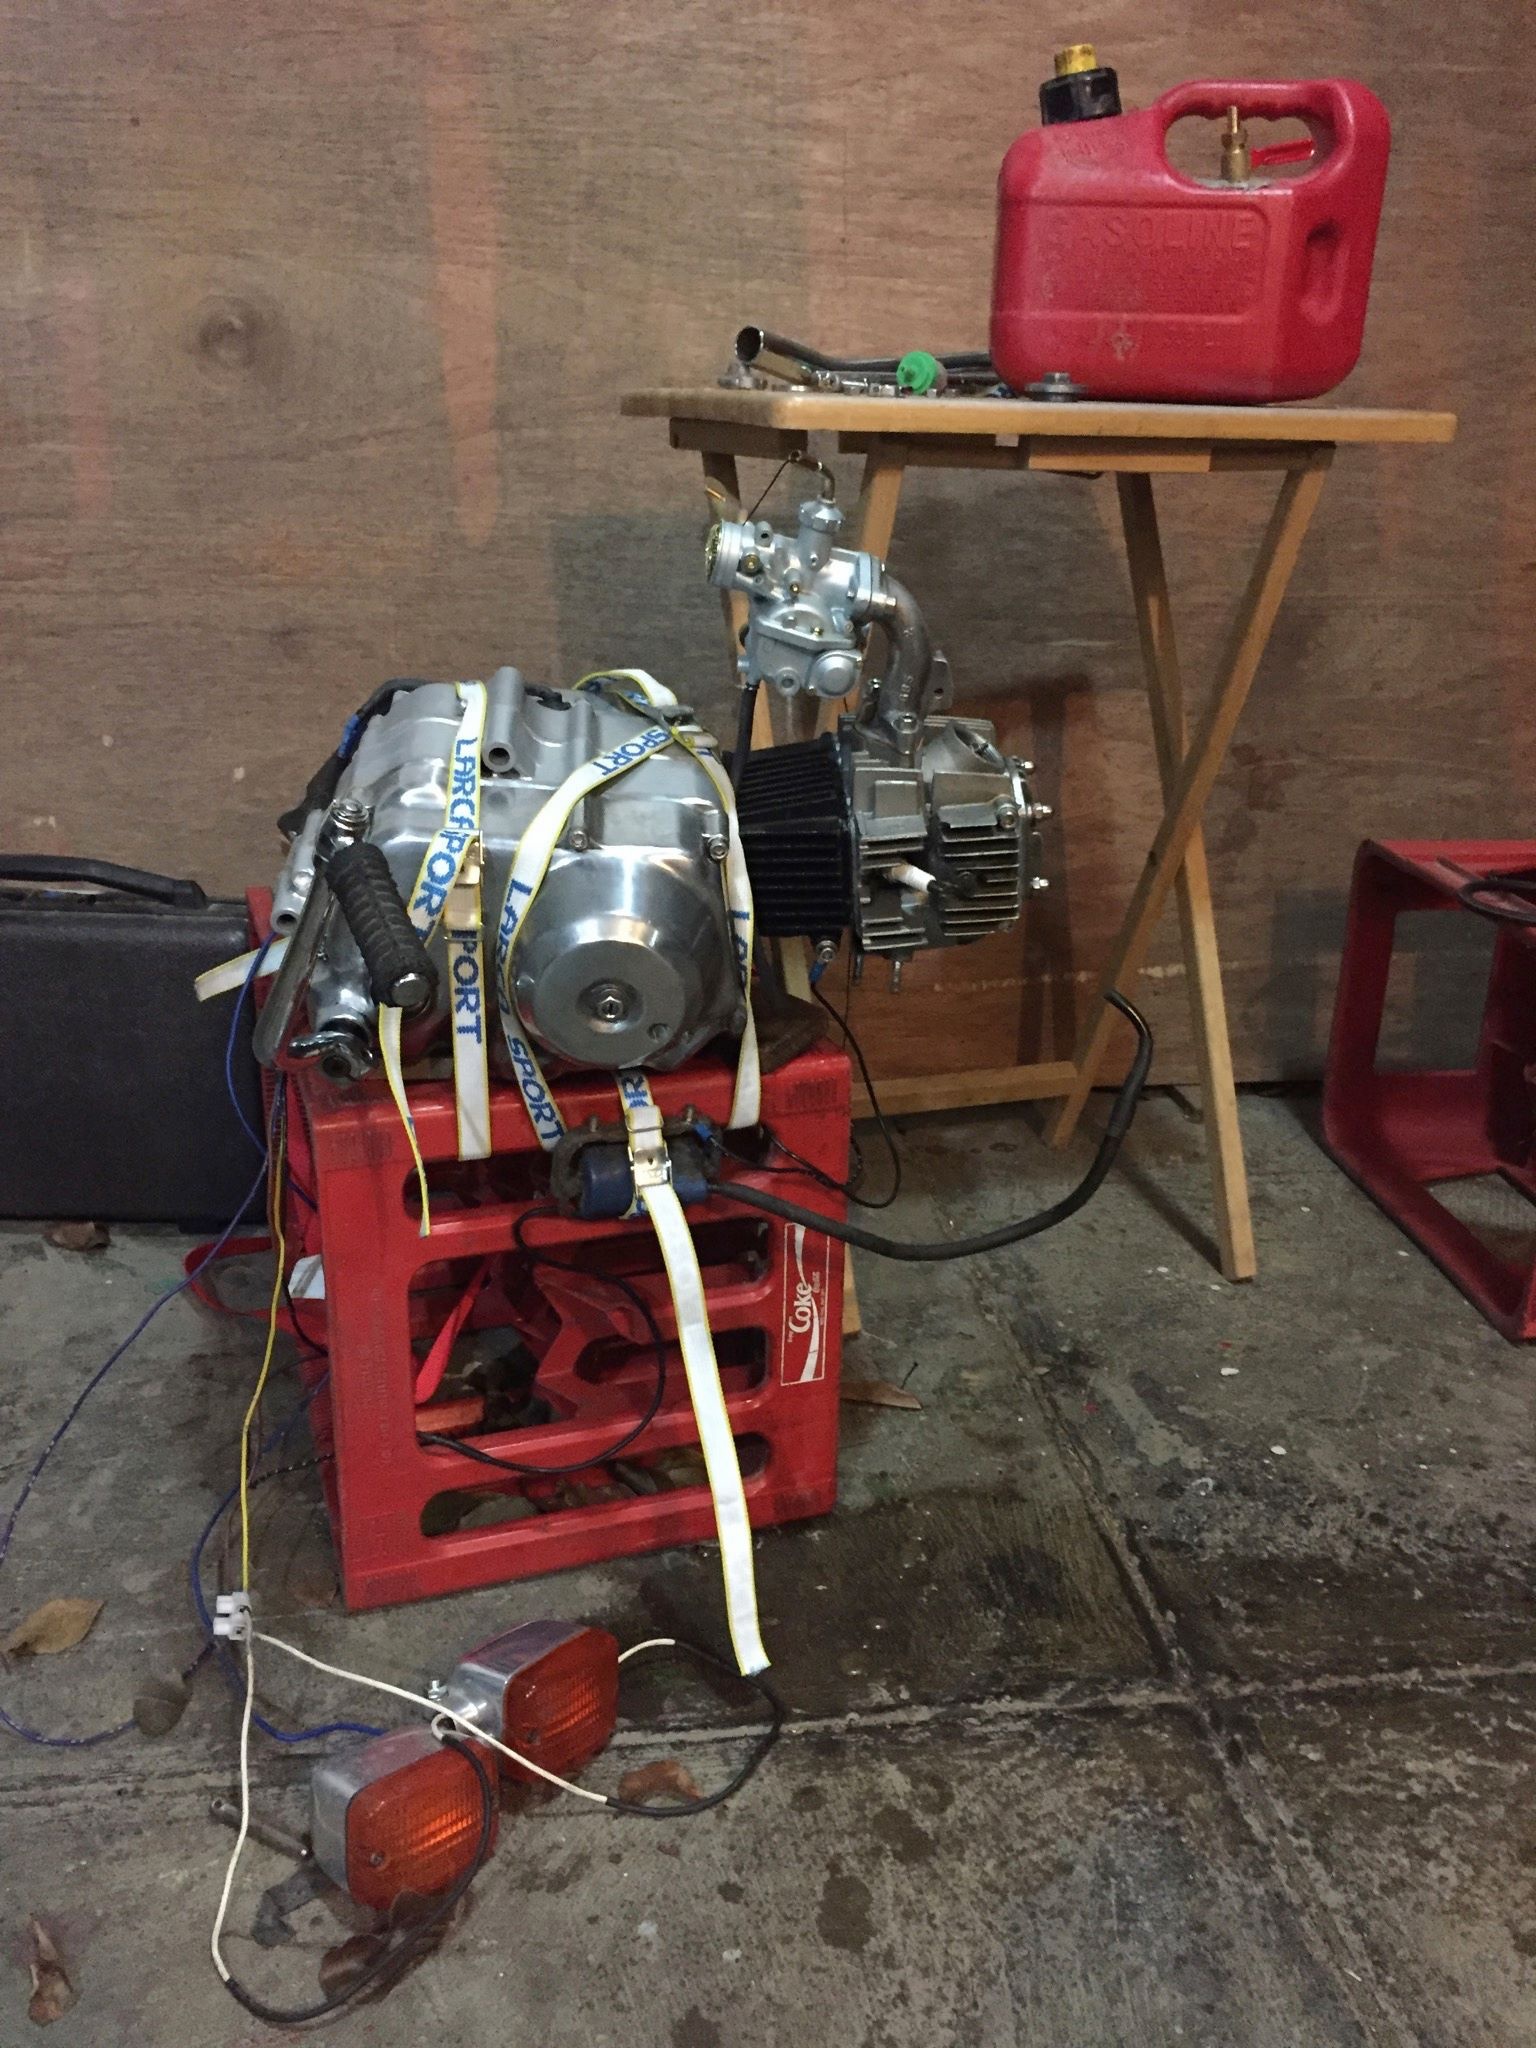 Tested the re-built Dax engine today